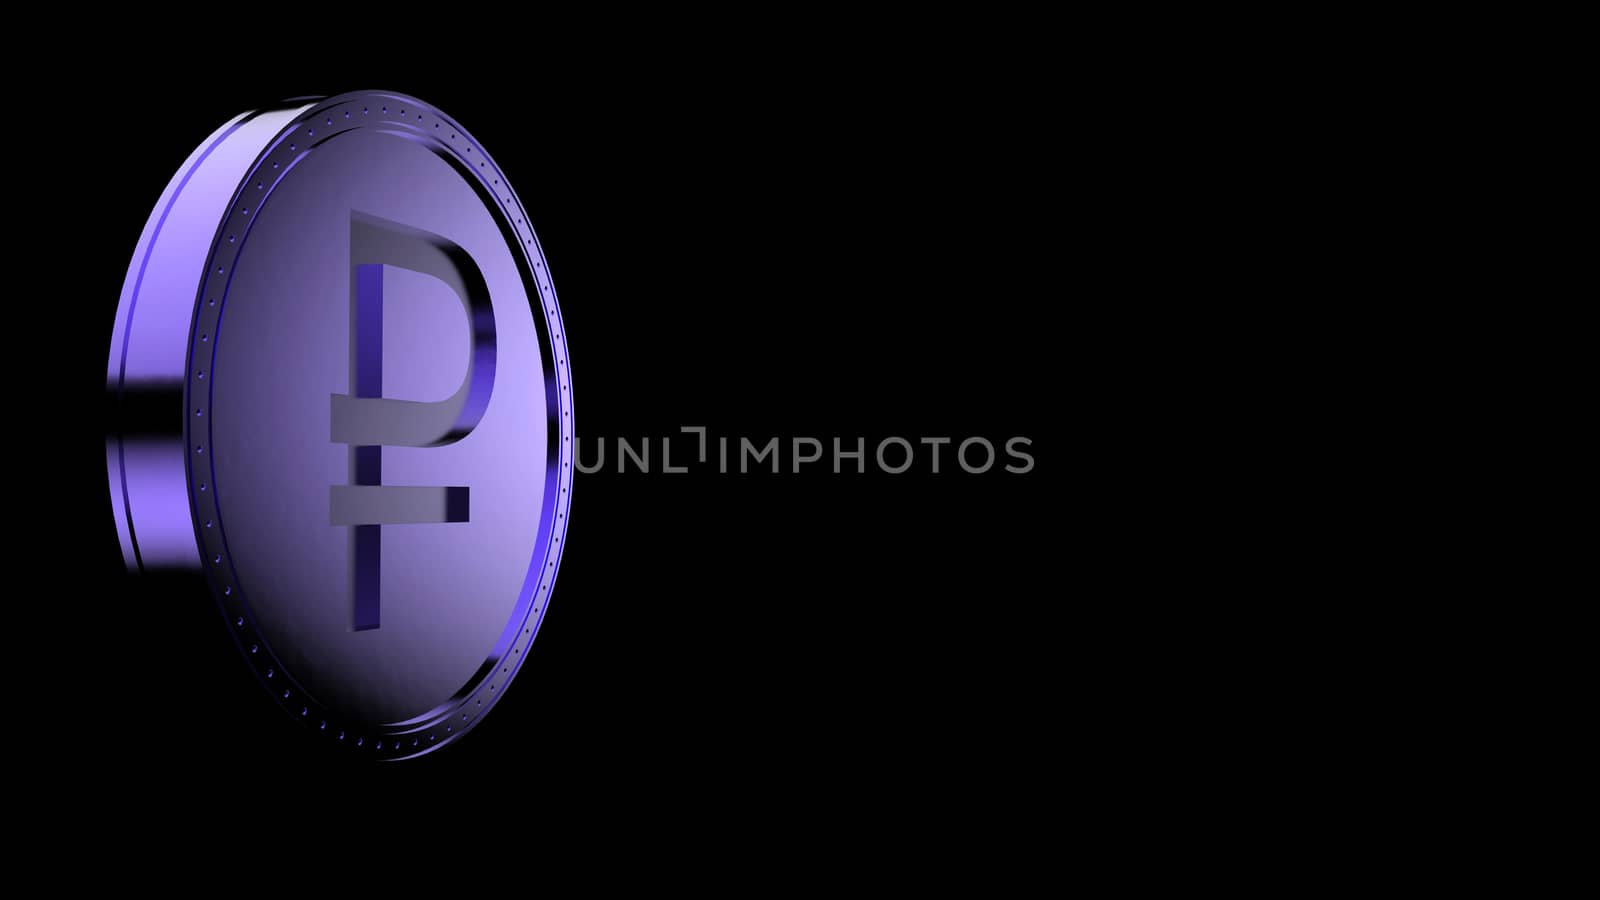 Violet ruble coin Isolated with black background. 3d render isolated illustration, business, management, risk, money, cash, growth, banking, bank, finance, symbol. by Andreajk3